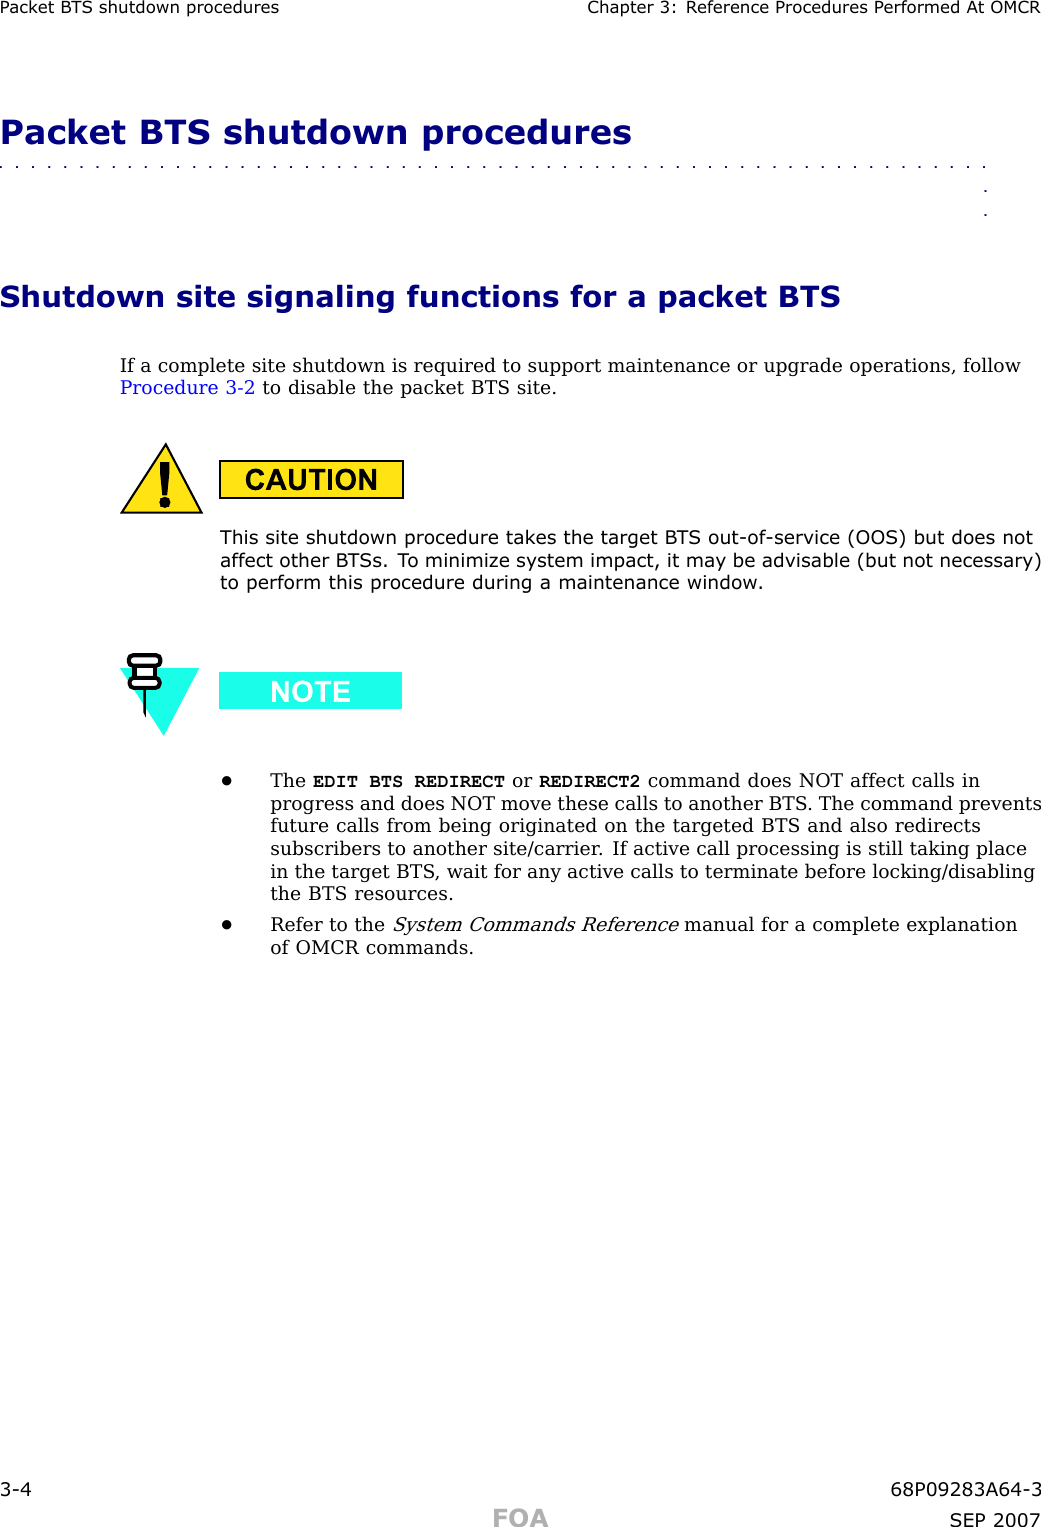 P ack et B T S shutdown procedures Chapter 3: R eference Procedures P erformed A t OMCRPacket BTS shutdown procedures■■■■■■■■■■■■■■■■■■■■■■■■■■■■■■■■■■■■■■■■■■■■■■■■■■■■■■■■■■■■■■■■Shutdown site signaling functions for a packet BTSIf a complete site shutdown is required to support maintenance or upgrade operations, followProcedure 3 -2 to disable the packet BTS site.This site shutdown procedure tak es the target B T S out -of -service (OOS) but does notaffect other B T Ss. T o minimiz e system impact, it ma y be advisable (but not necessary)to perform this procedure during a maintenance window .•The EDIT BTS REDIRECT or REDIRECT2 command does NOT affect calls inprogress and does NOT move these calls to another BTS . The command preventsfuture calls from being originated on the targeted BTS and also redirectssubscribers to another site/carrier . If active call processing is still taking placein the target BTS , wait for any active calls to terminate before locking/disablingthe BTS resources.•Refer to theSystem Commands Referencemanual for a complete explanationof OMCR commands.3 -4 68P09283A64 -3FOA SEP 2007